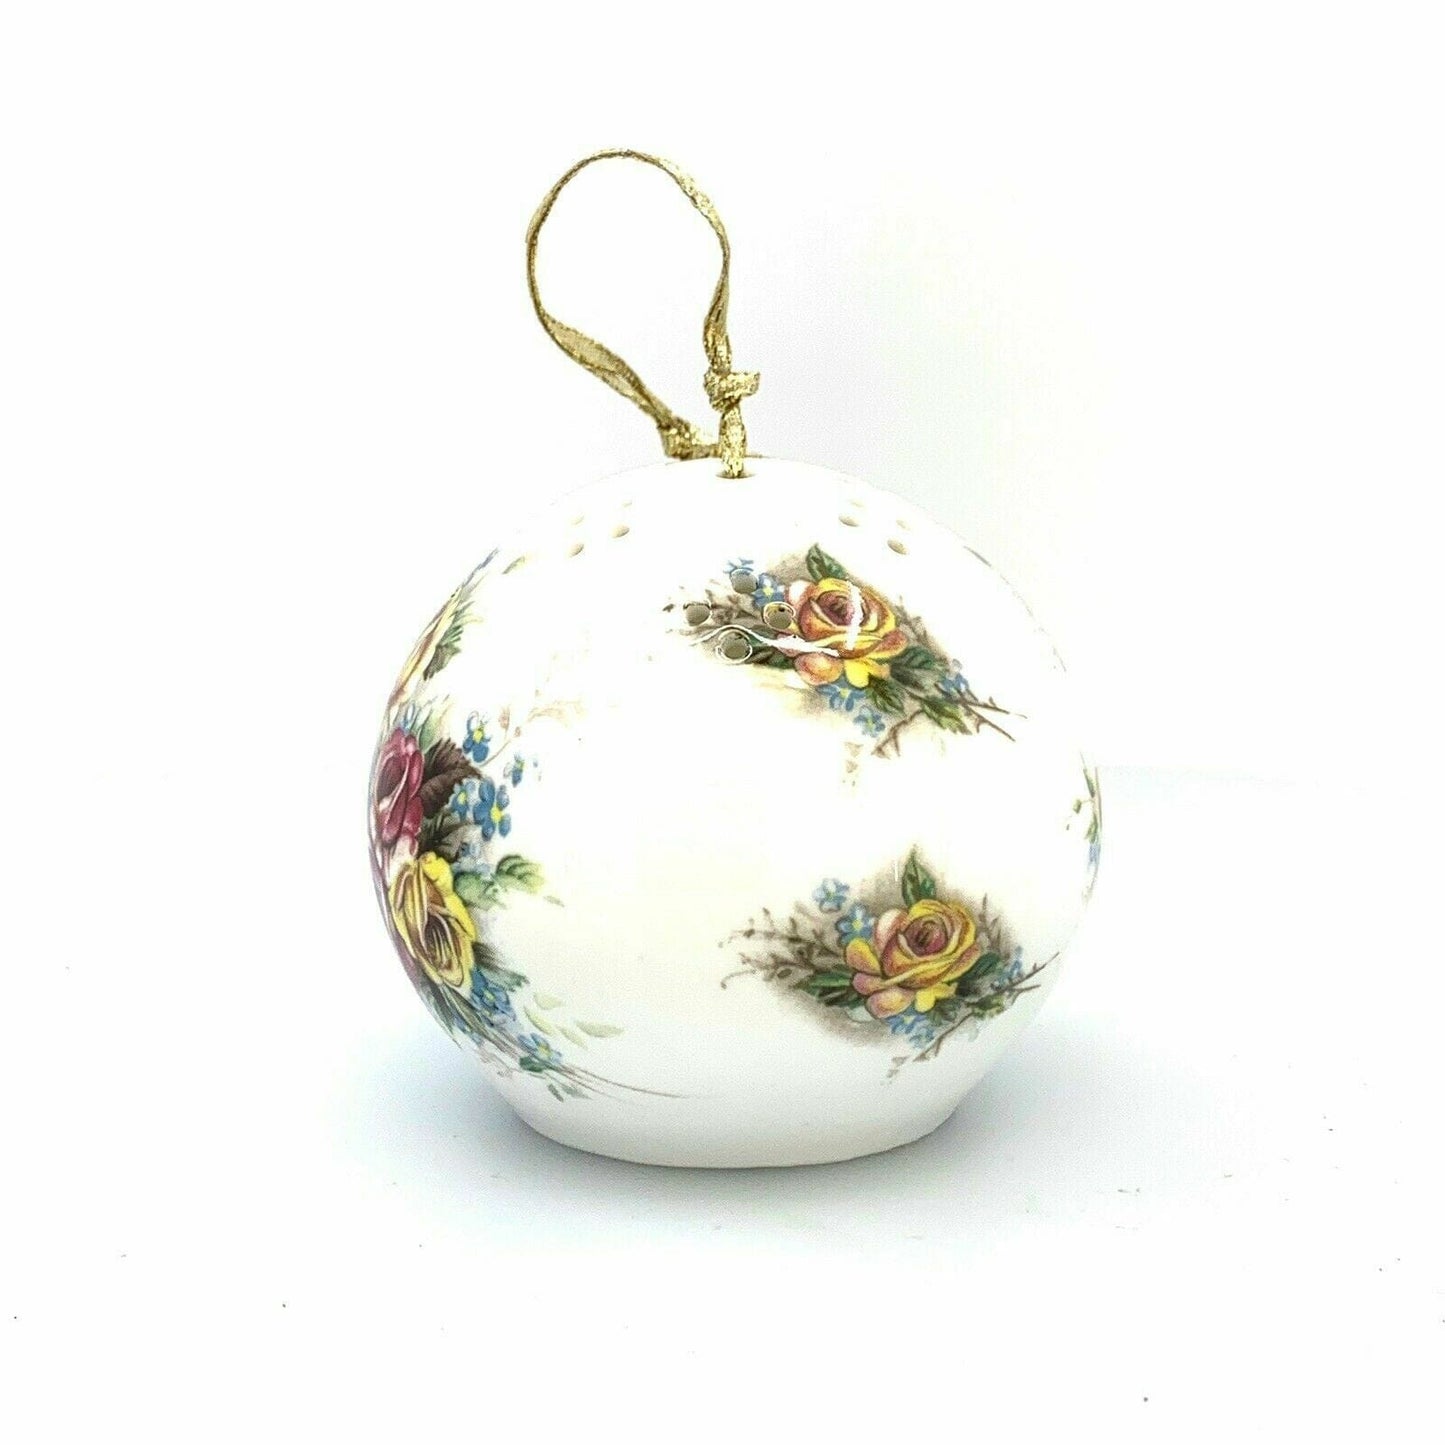 Exquisite Royal Windsor Fine Bone China Fragrance Diffuser Ornament - Charming - Very Good - Unisex